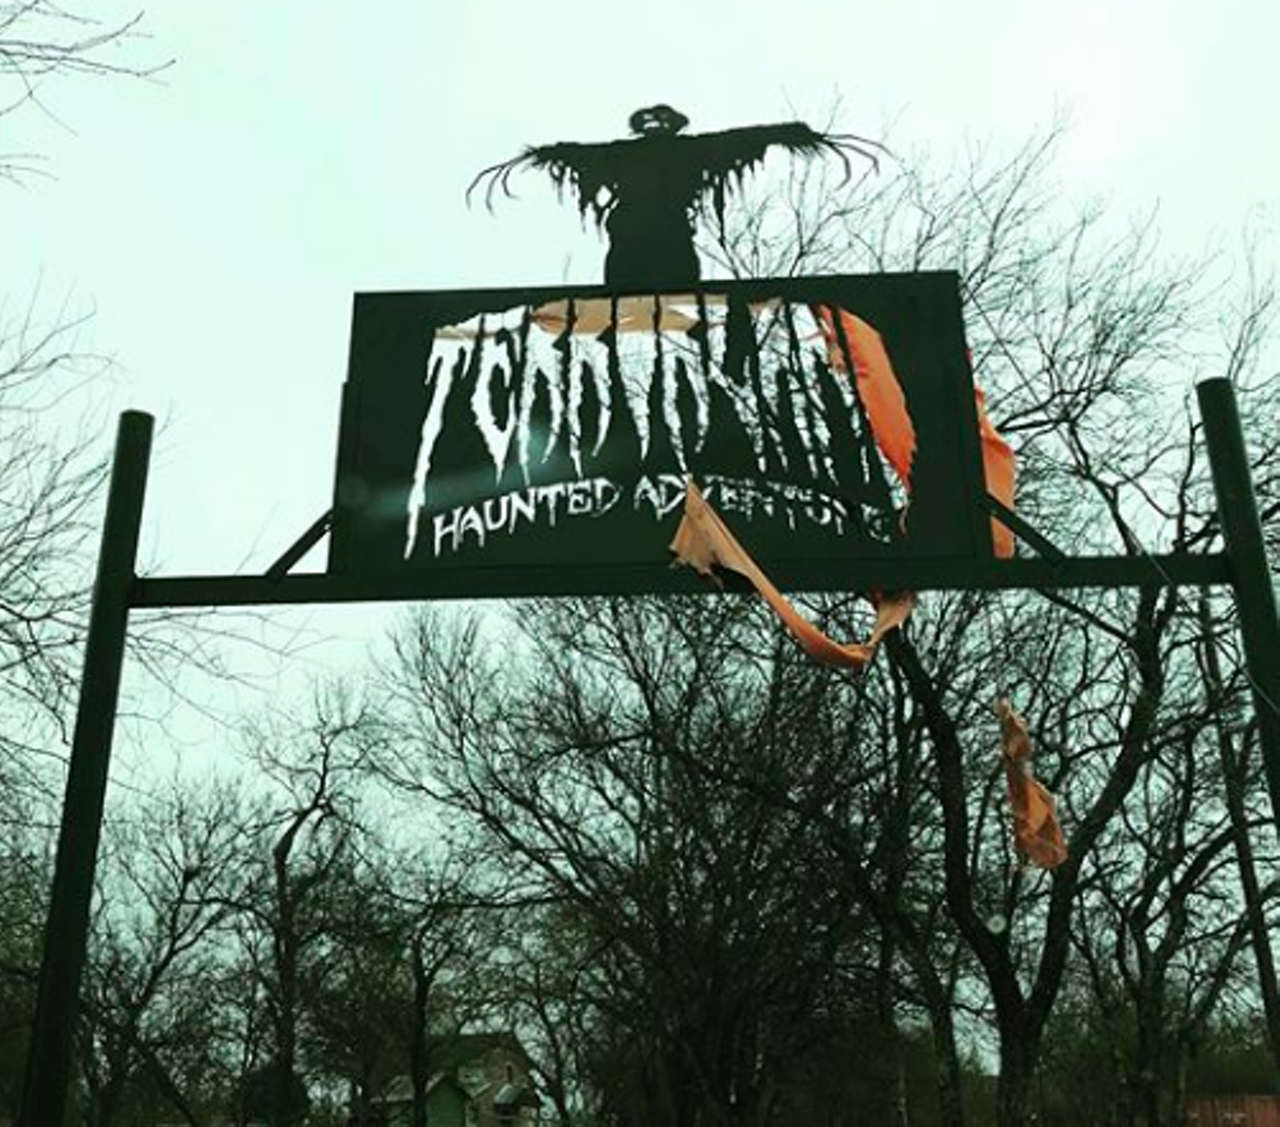 Terrorland
15204 E Loop 1604 S, (210) 262-2324, terrorland.net
Open for three nights only, Terrorland is the scariest attraction in south San Antonio. This outdoor spot may not be the scariest, but it’s much different than the usual haunted houses here. Also part of the spookiness is Gravestone Estates: The Awakening, so be sure to take in all of the frights you can take. 
Photo via Instagram / reynamuerta